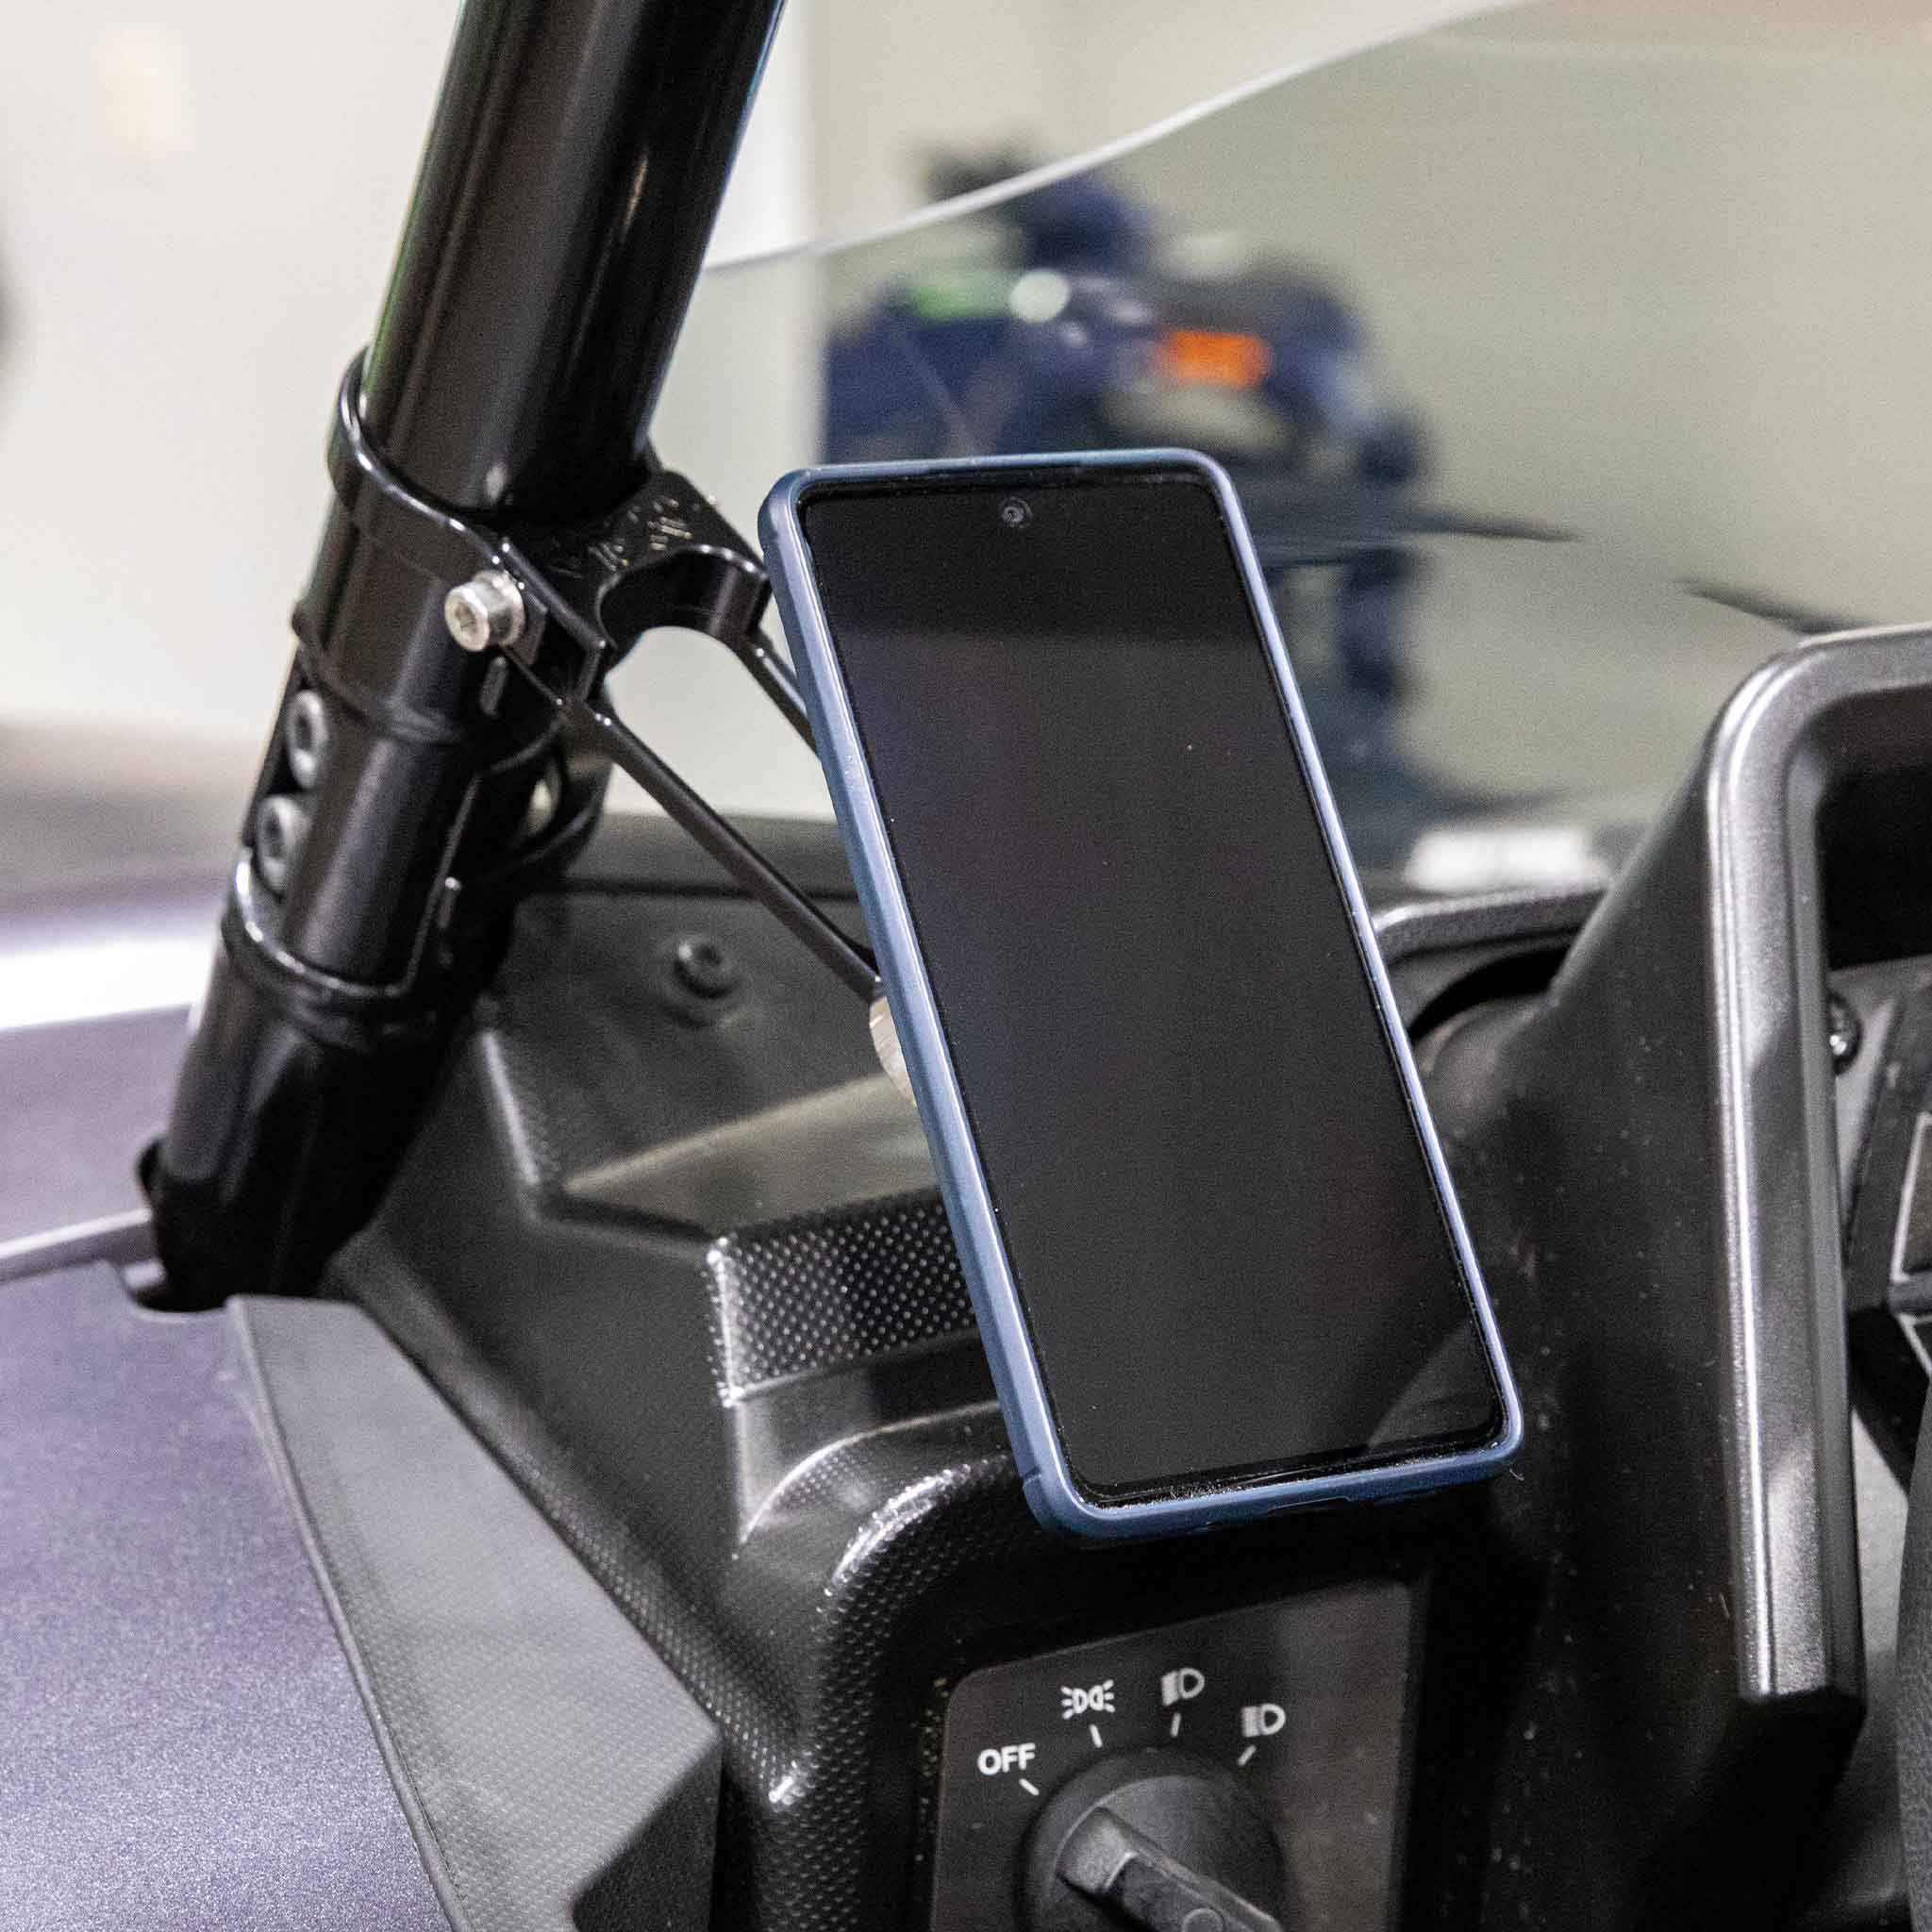 1.75" Offset Roll Cage Magnetic Phone Mount shown on Artic Cat Wildcat XX side by side(1.75" Mount shown on Wildcat XX)